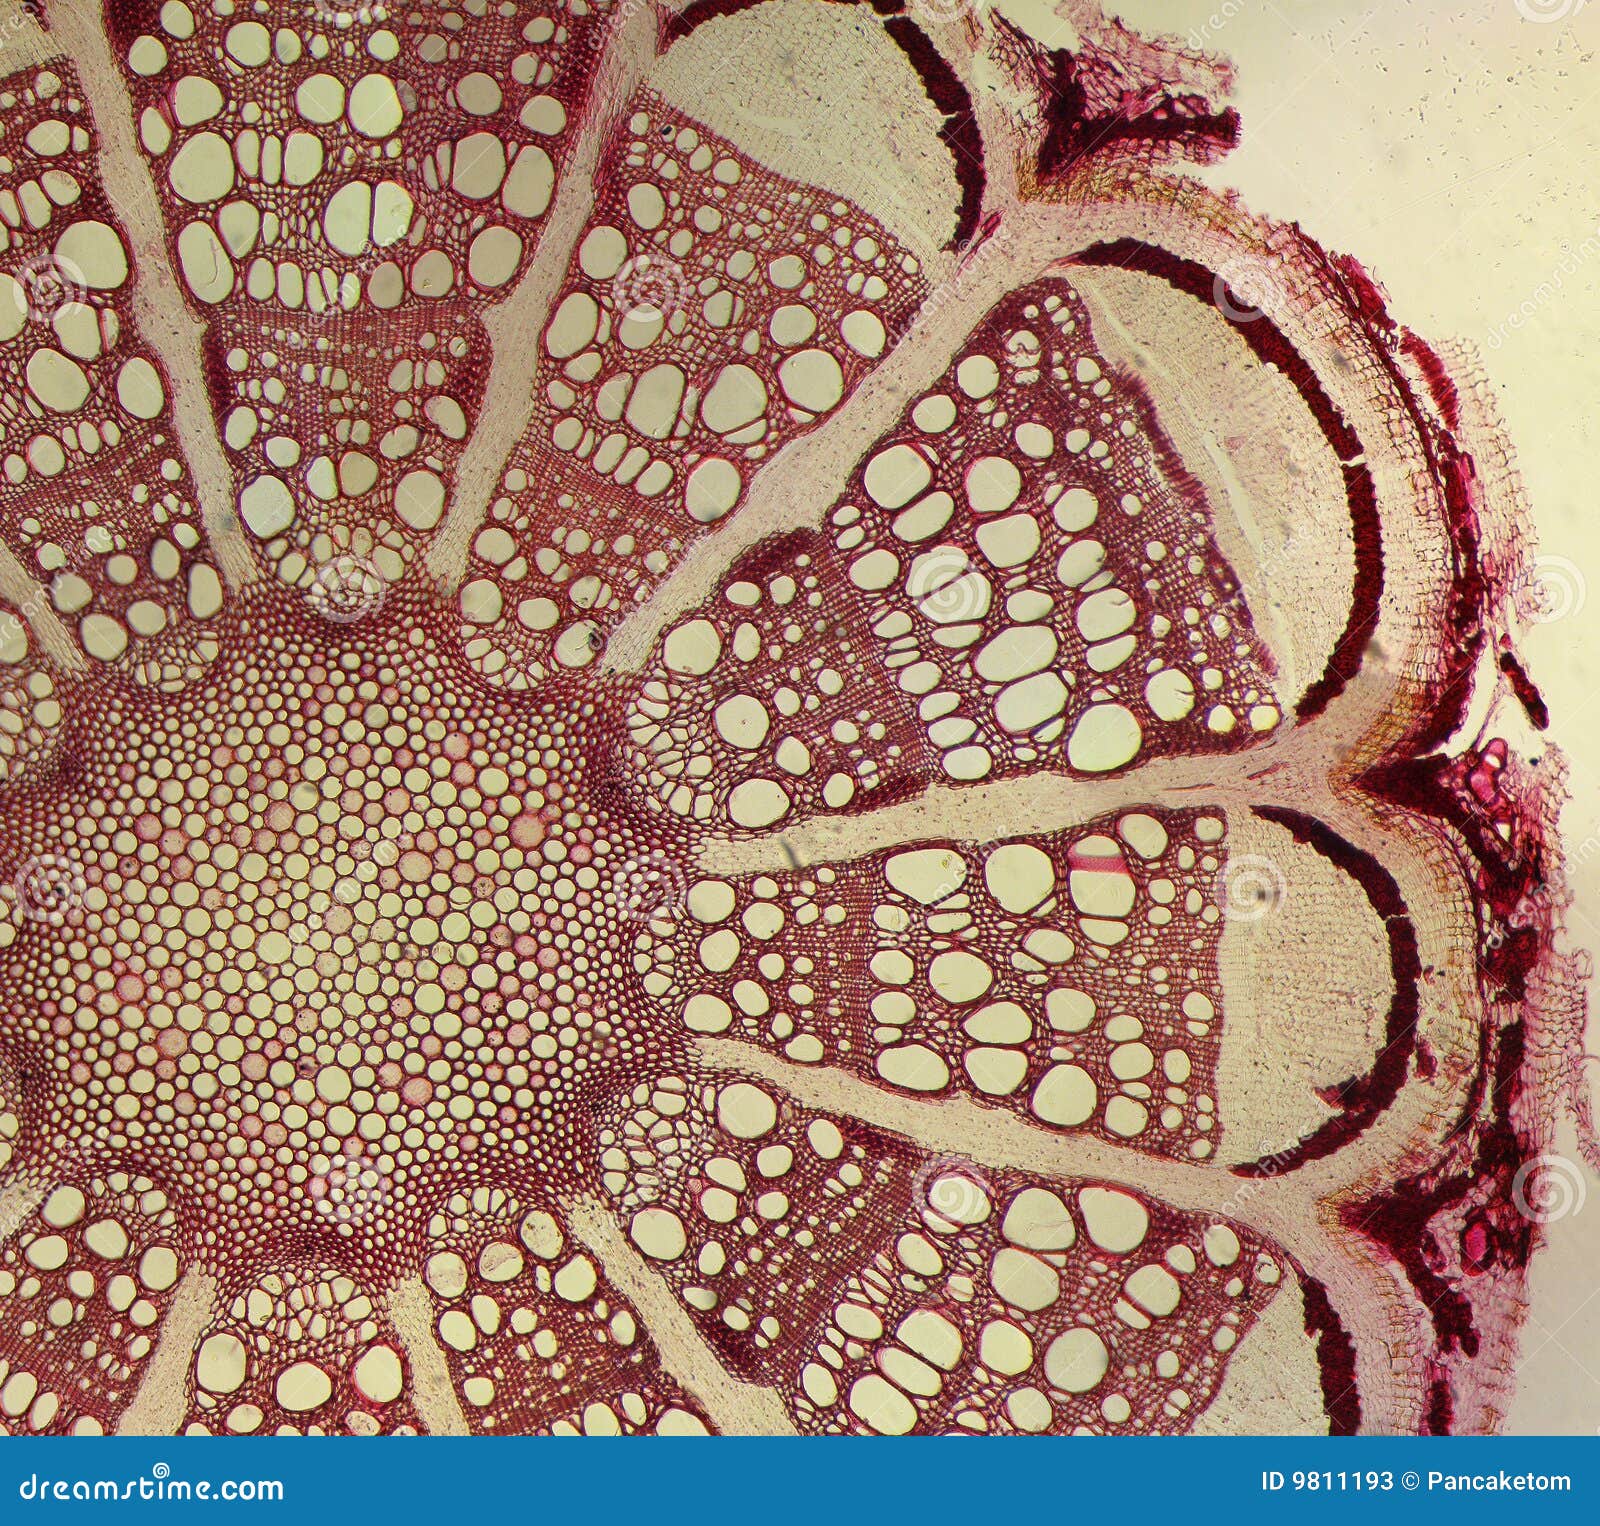 clematis root cross section